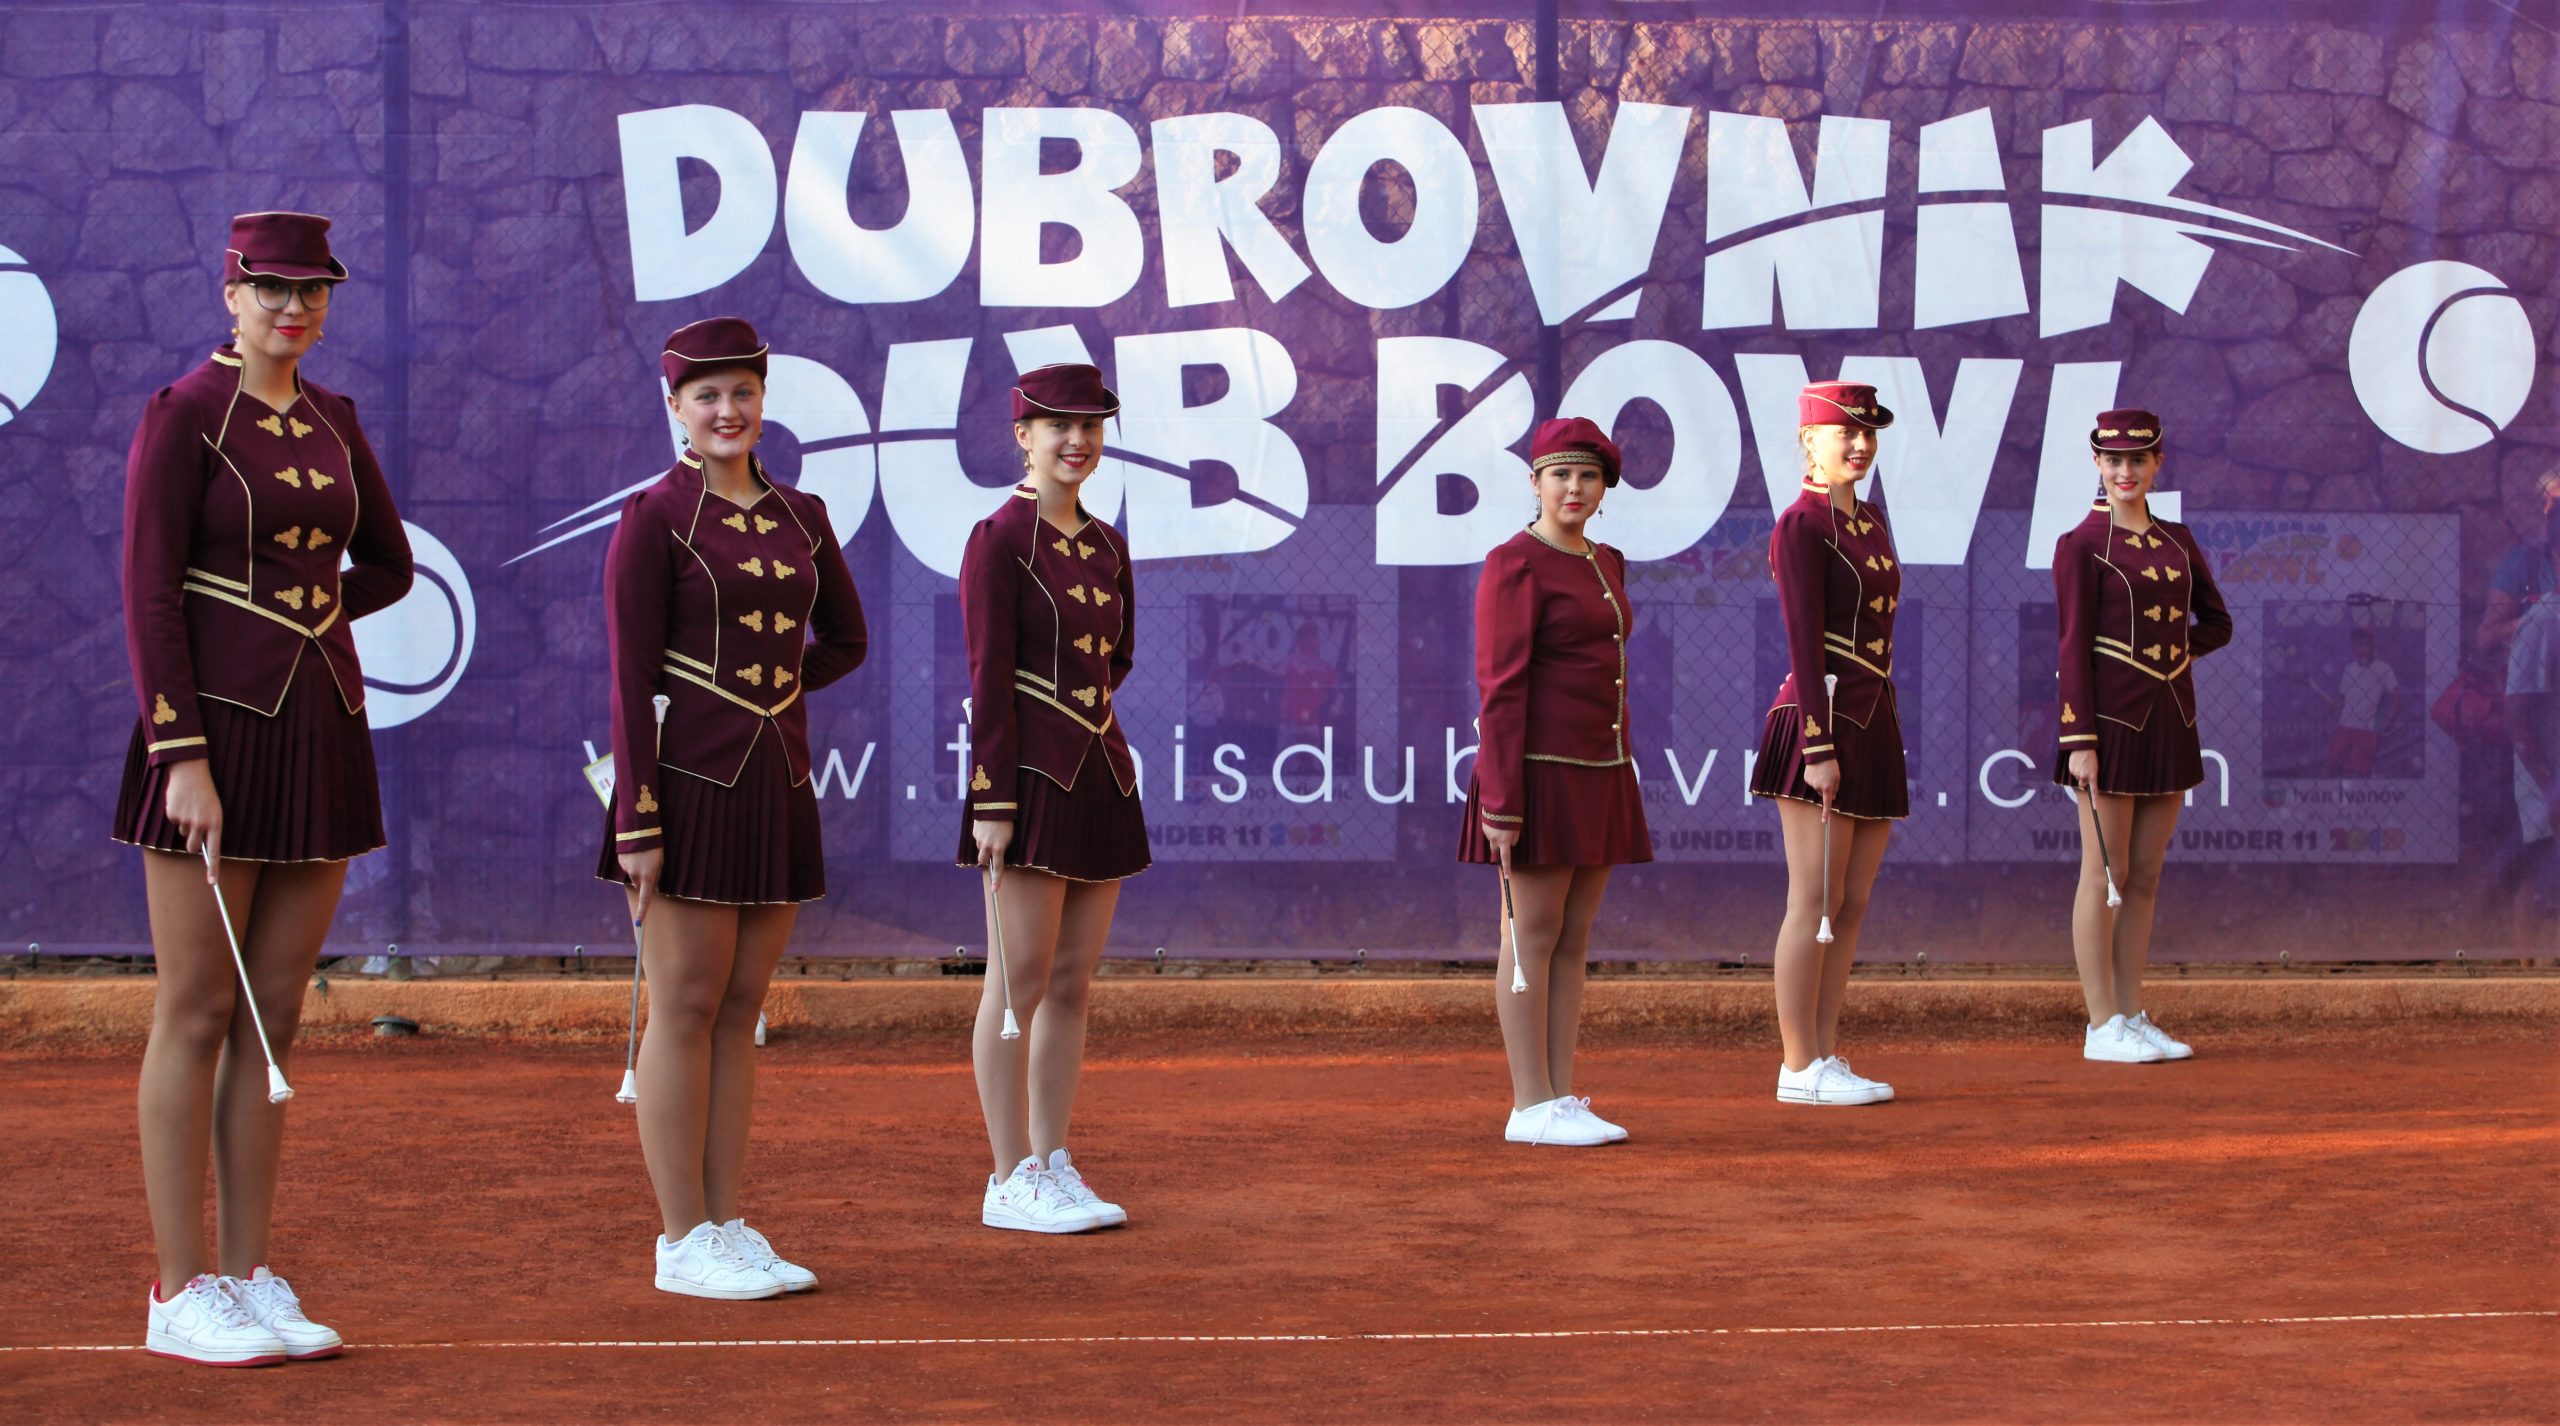 Dubrovnik Dub Bowl results for Monday 11.07.2022.